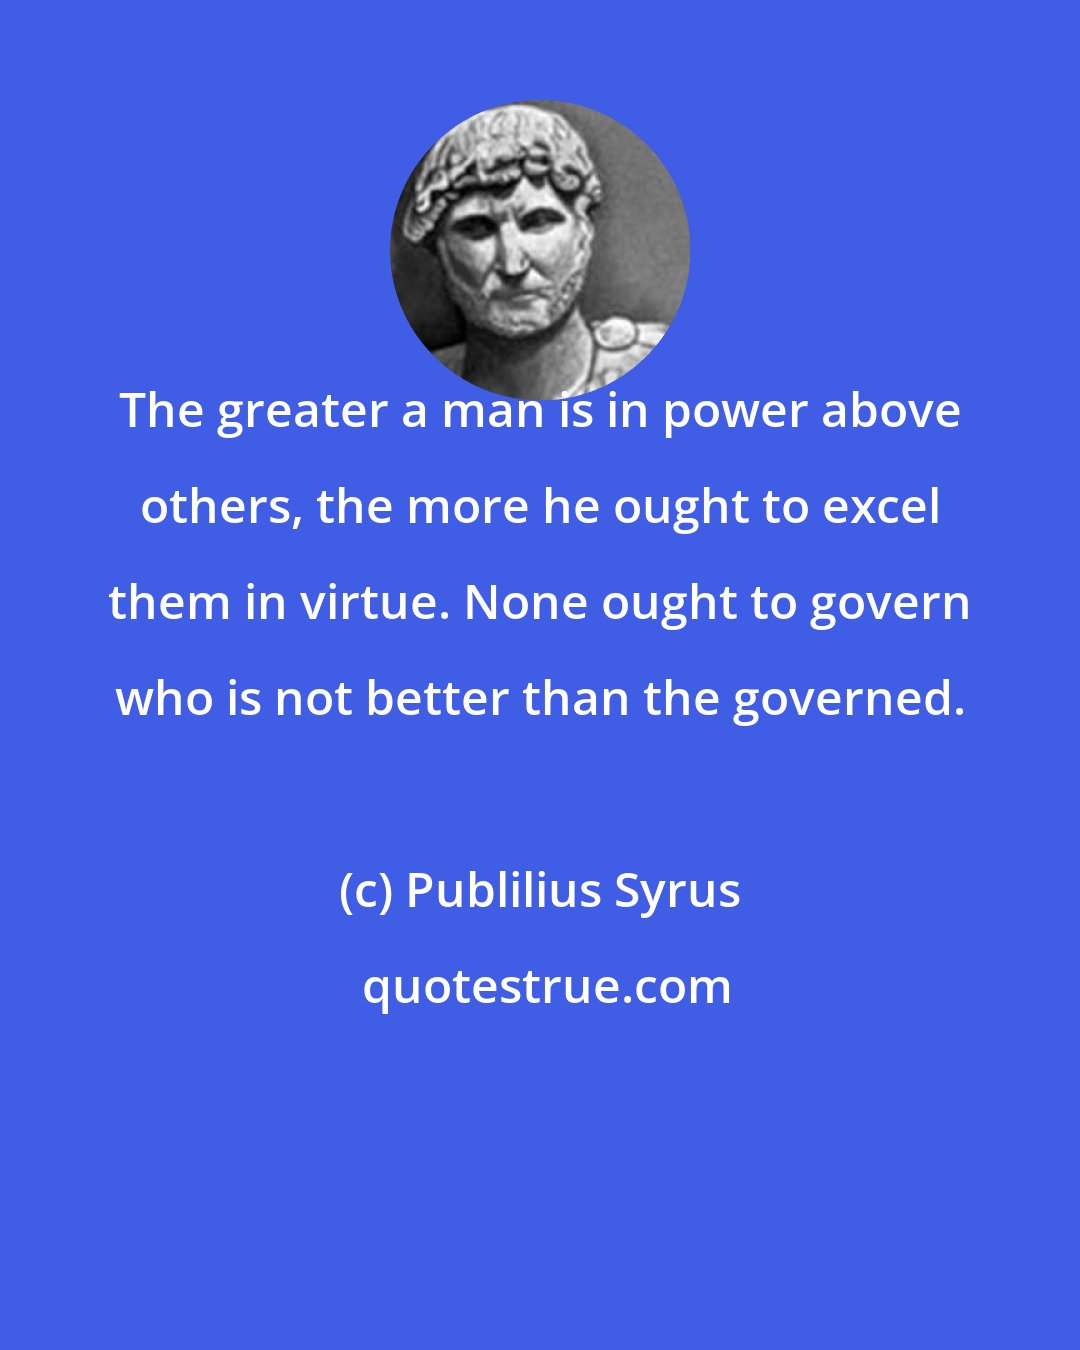 Publilius Syrus: The greater a man is in power above others, the more he ought to excel them in virtue. None ought to govern who is not better than the governed.